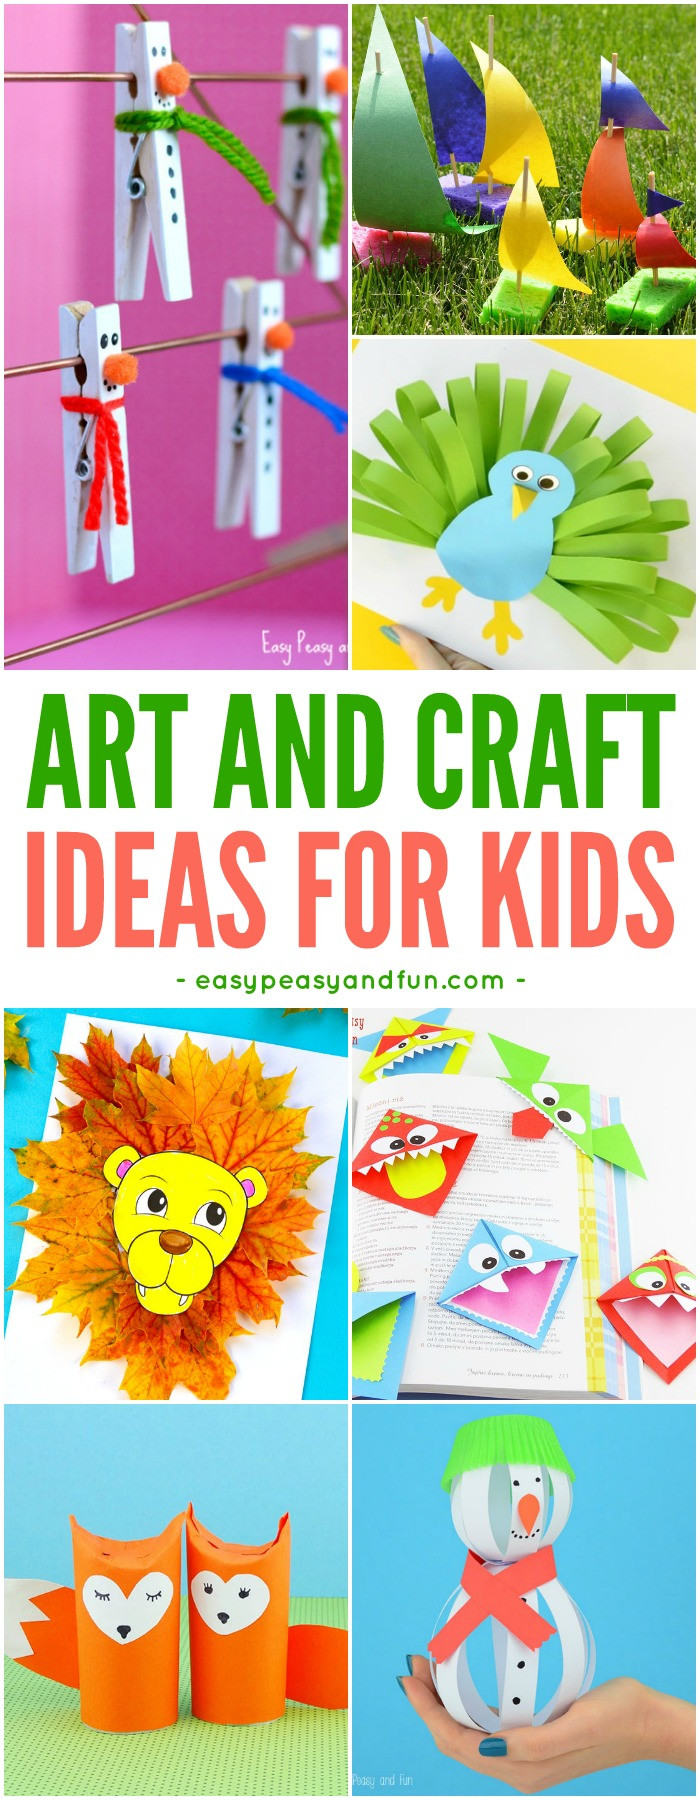 Fun Arts And Crafts For Toddlers
 Crafts For Kids Tons of Art and Craft Ideas for Kids to